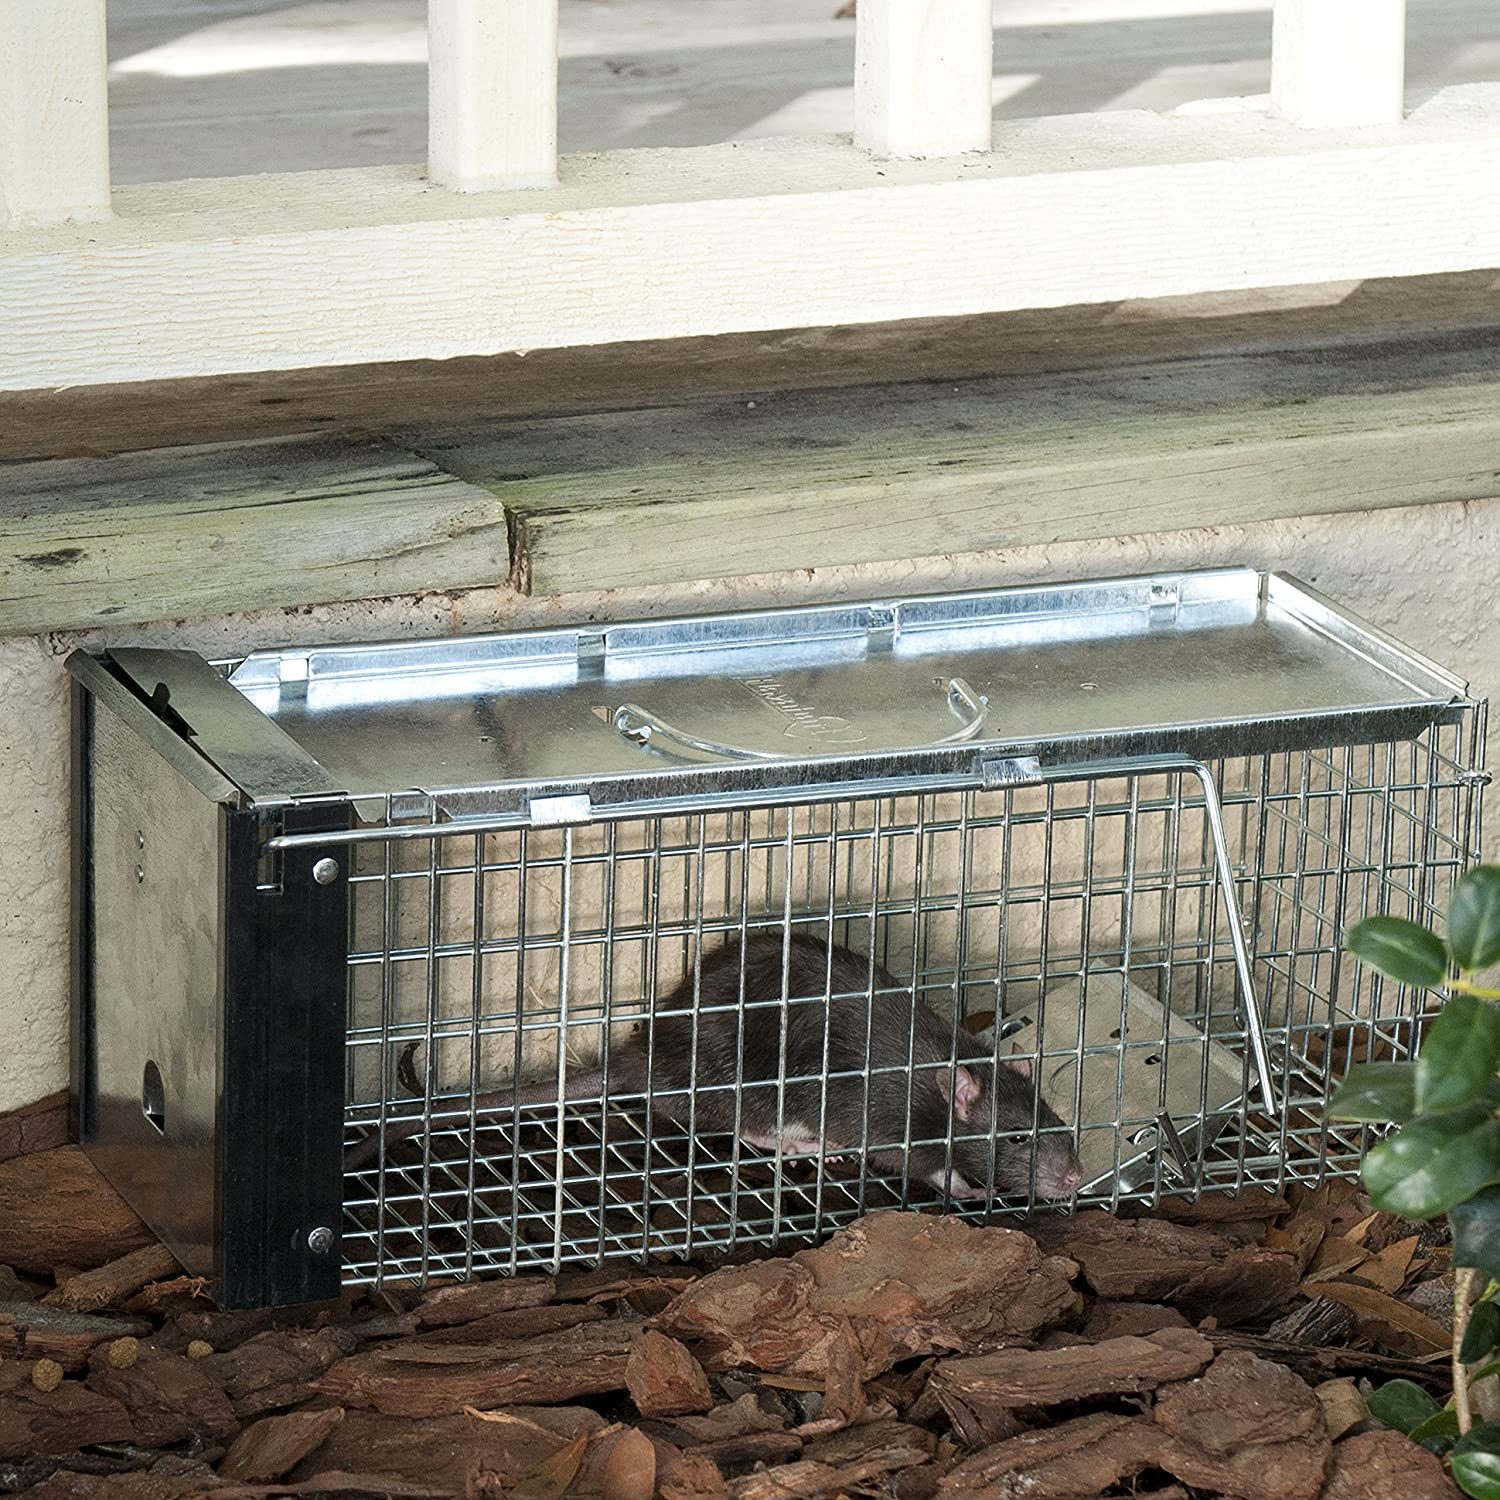 SuperCat rat trap with bait: natural and efficient way to catch rats